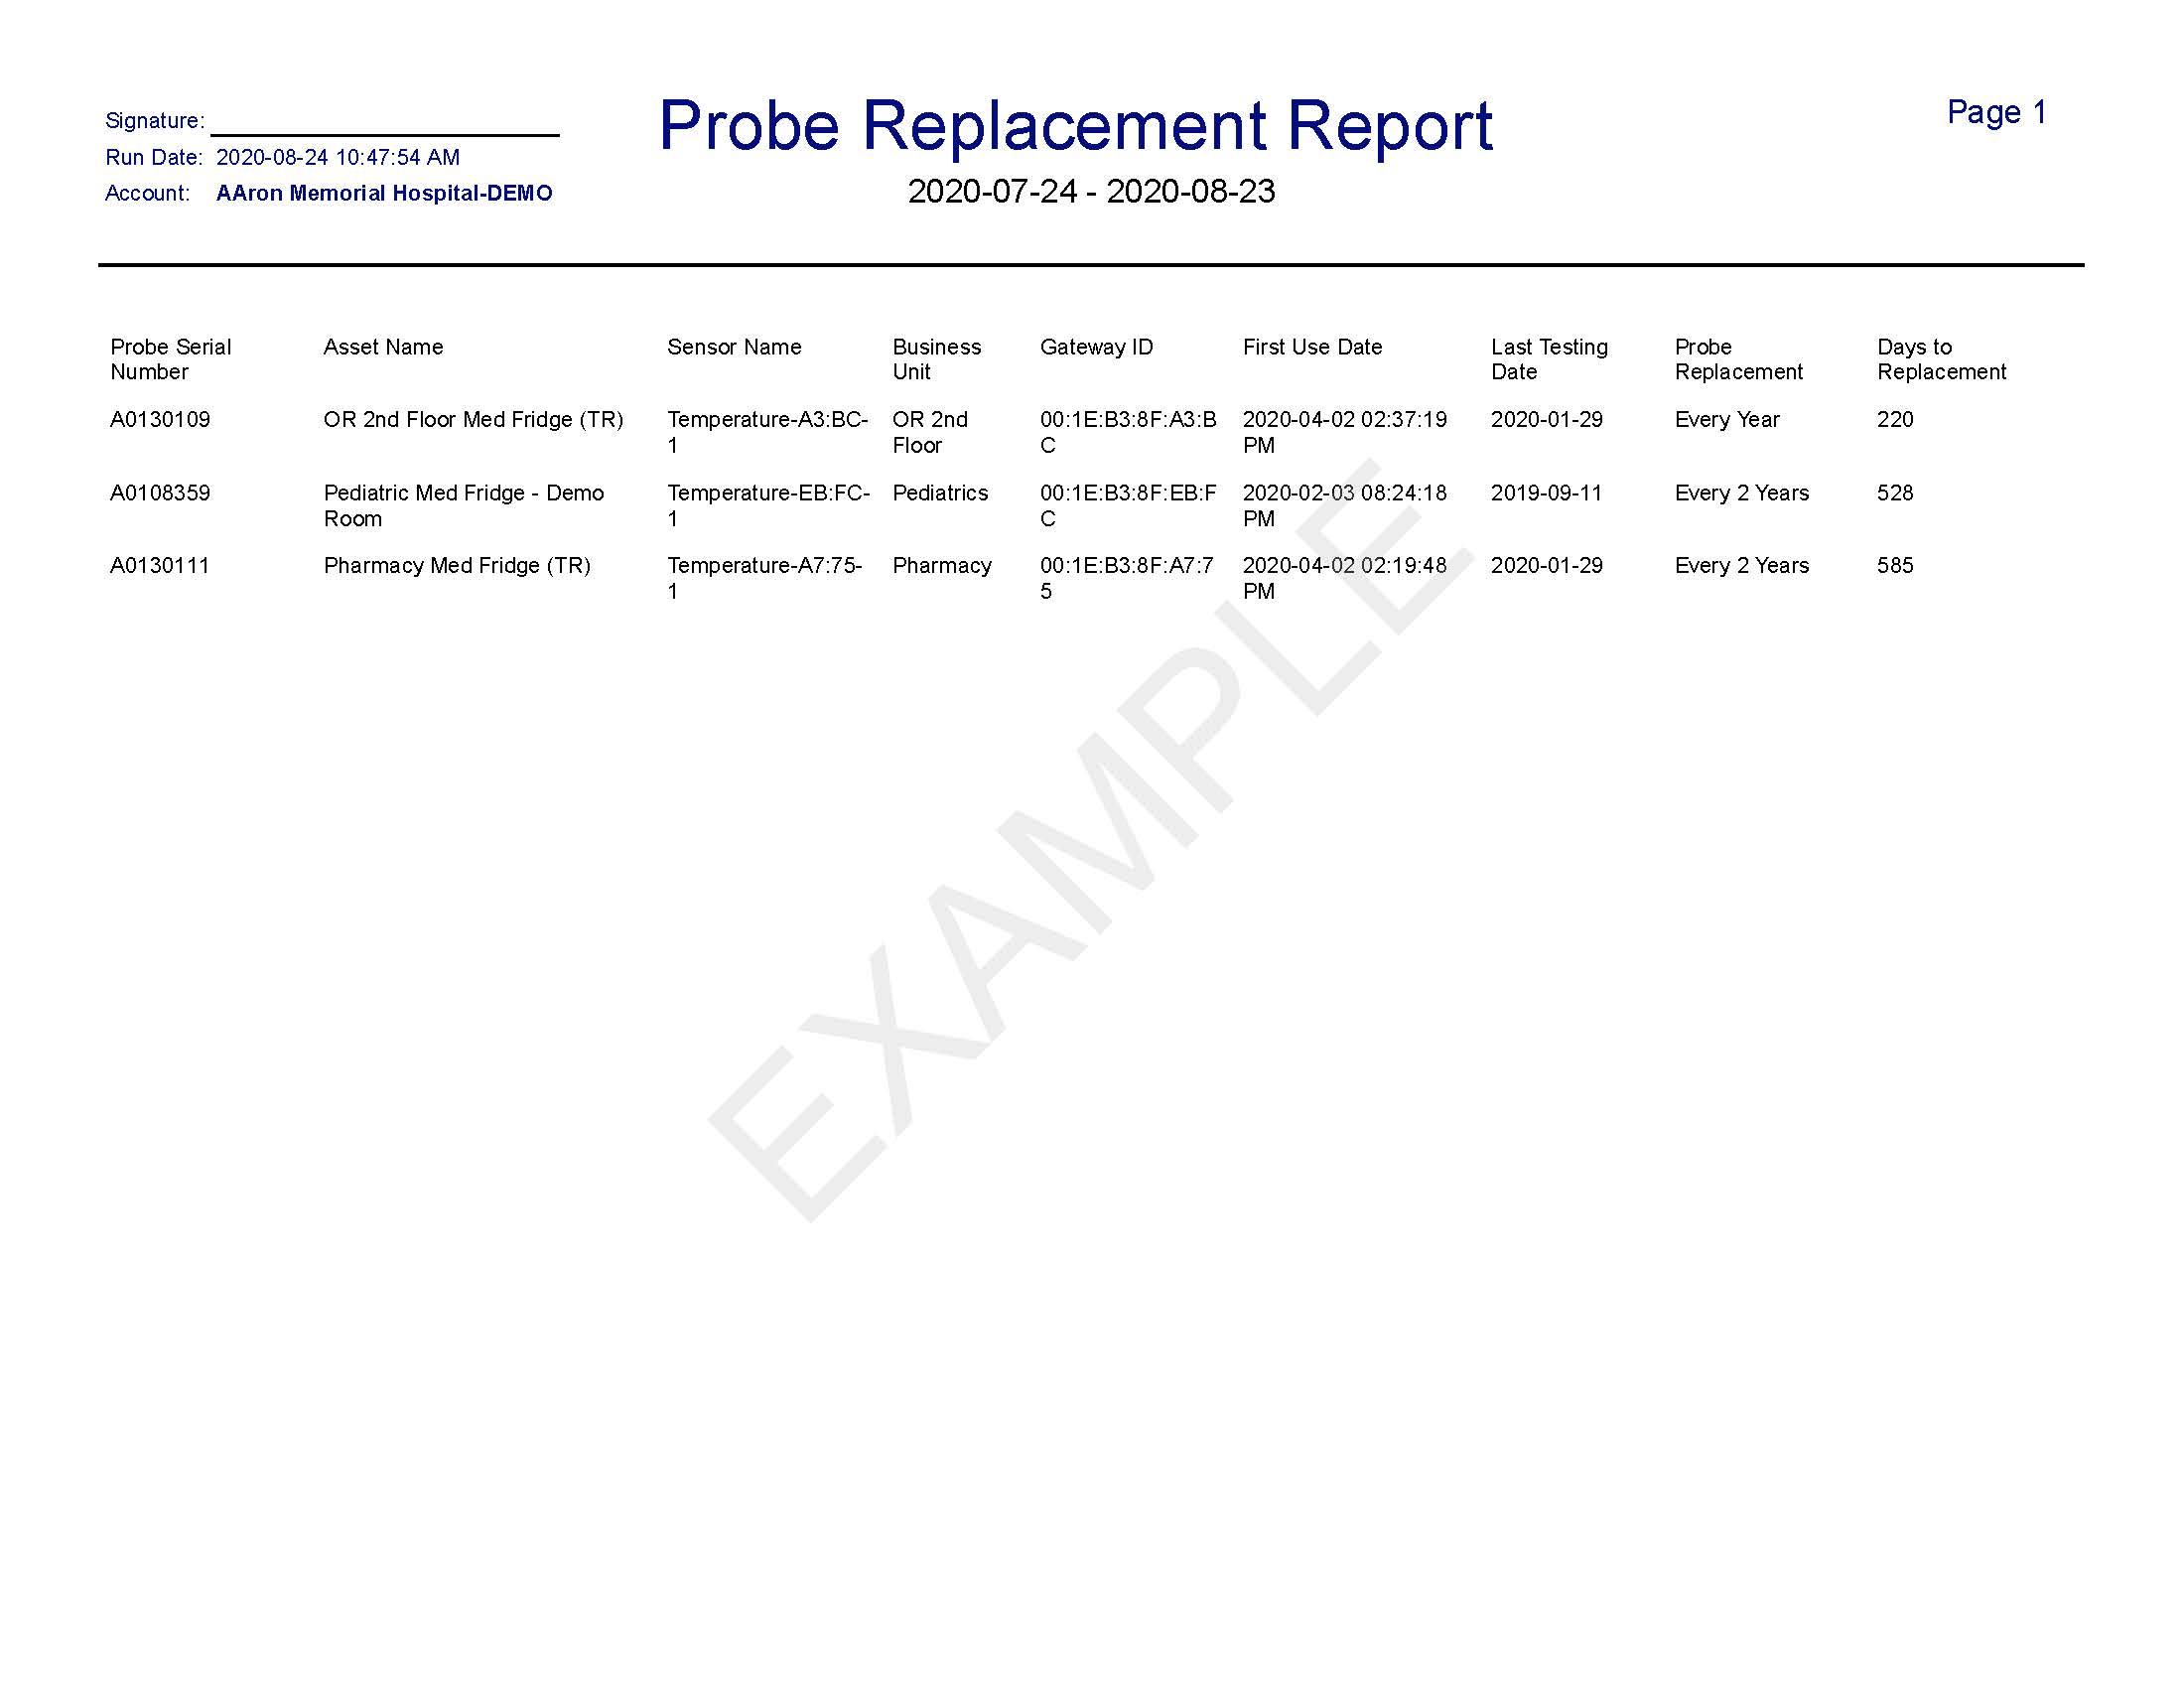 probe-replacement-report.pdf